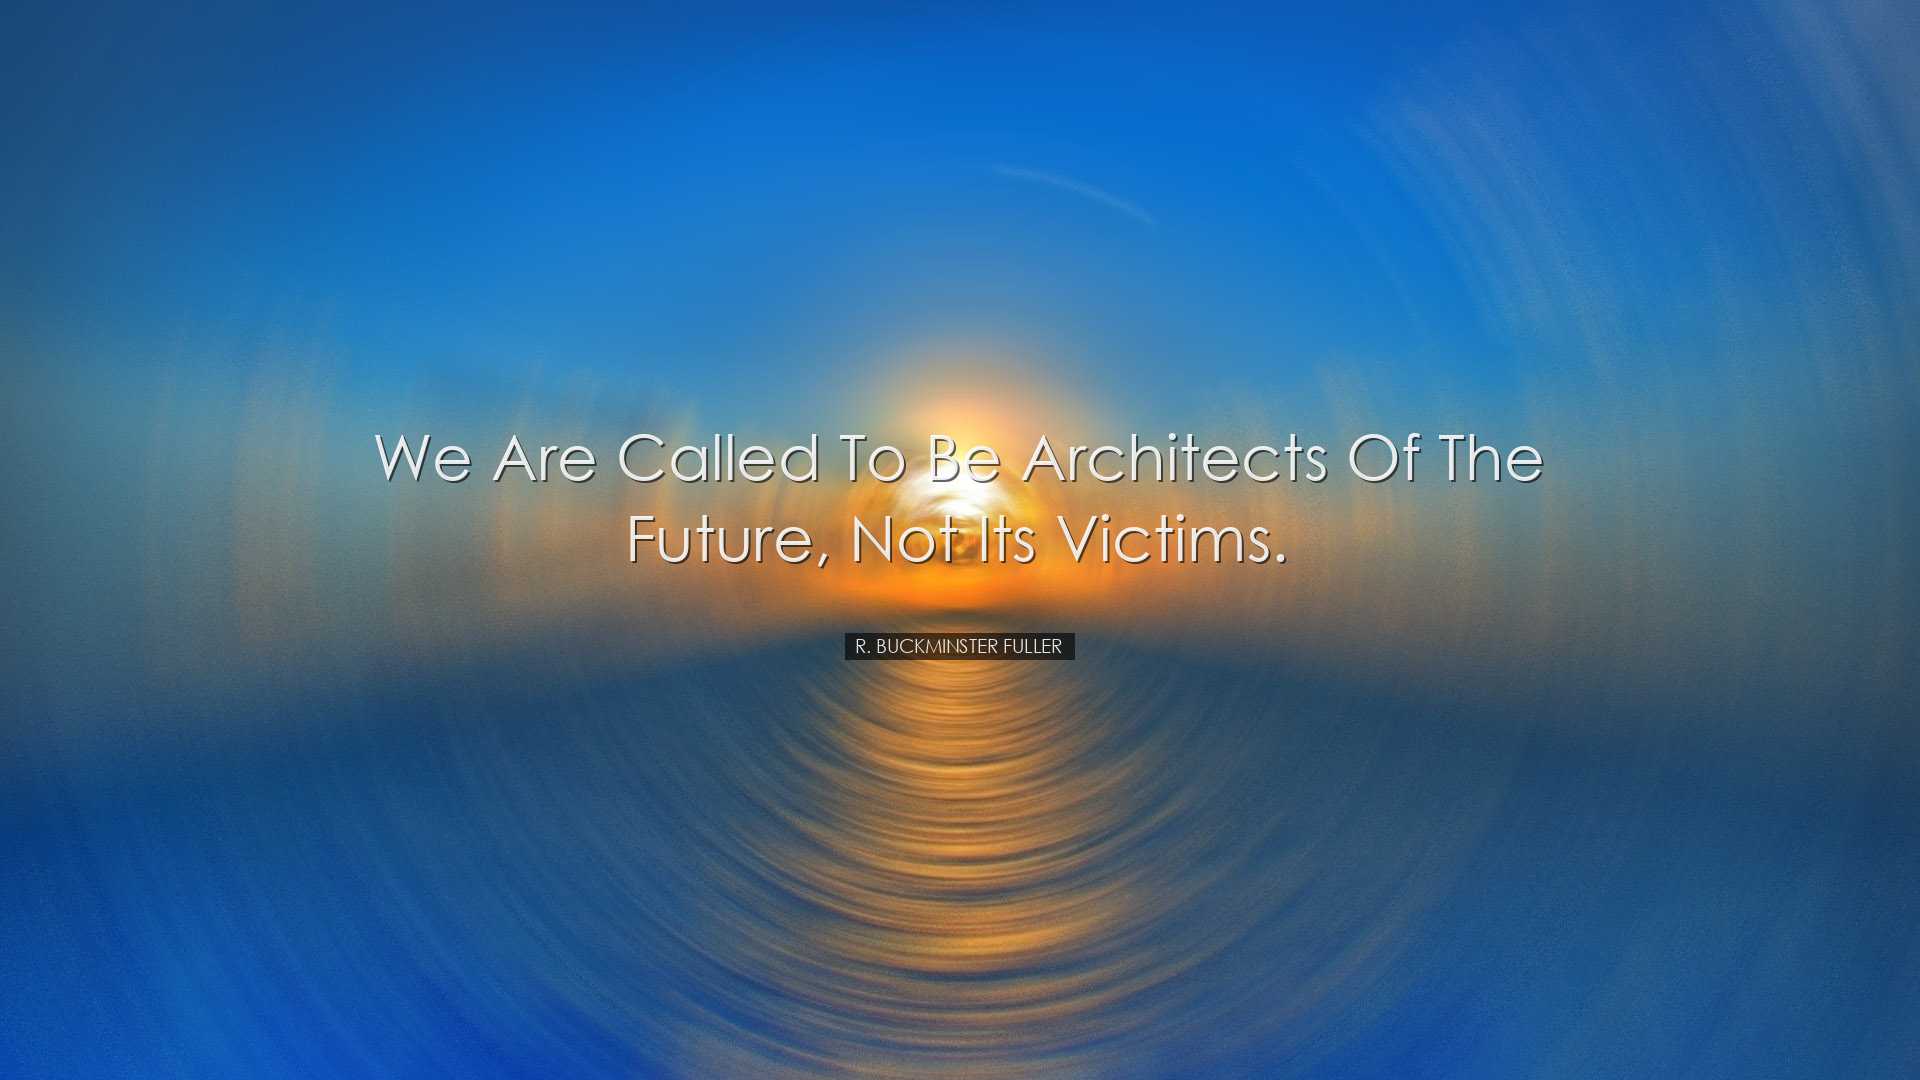 We are called to be architects of the future, not its victims. - R